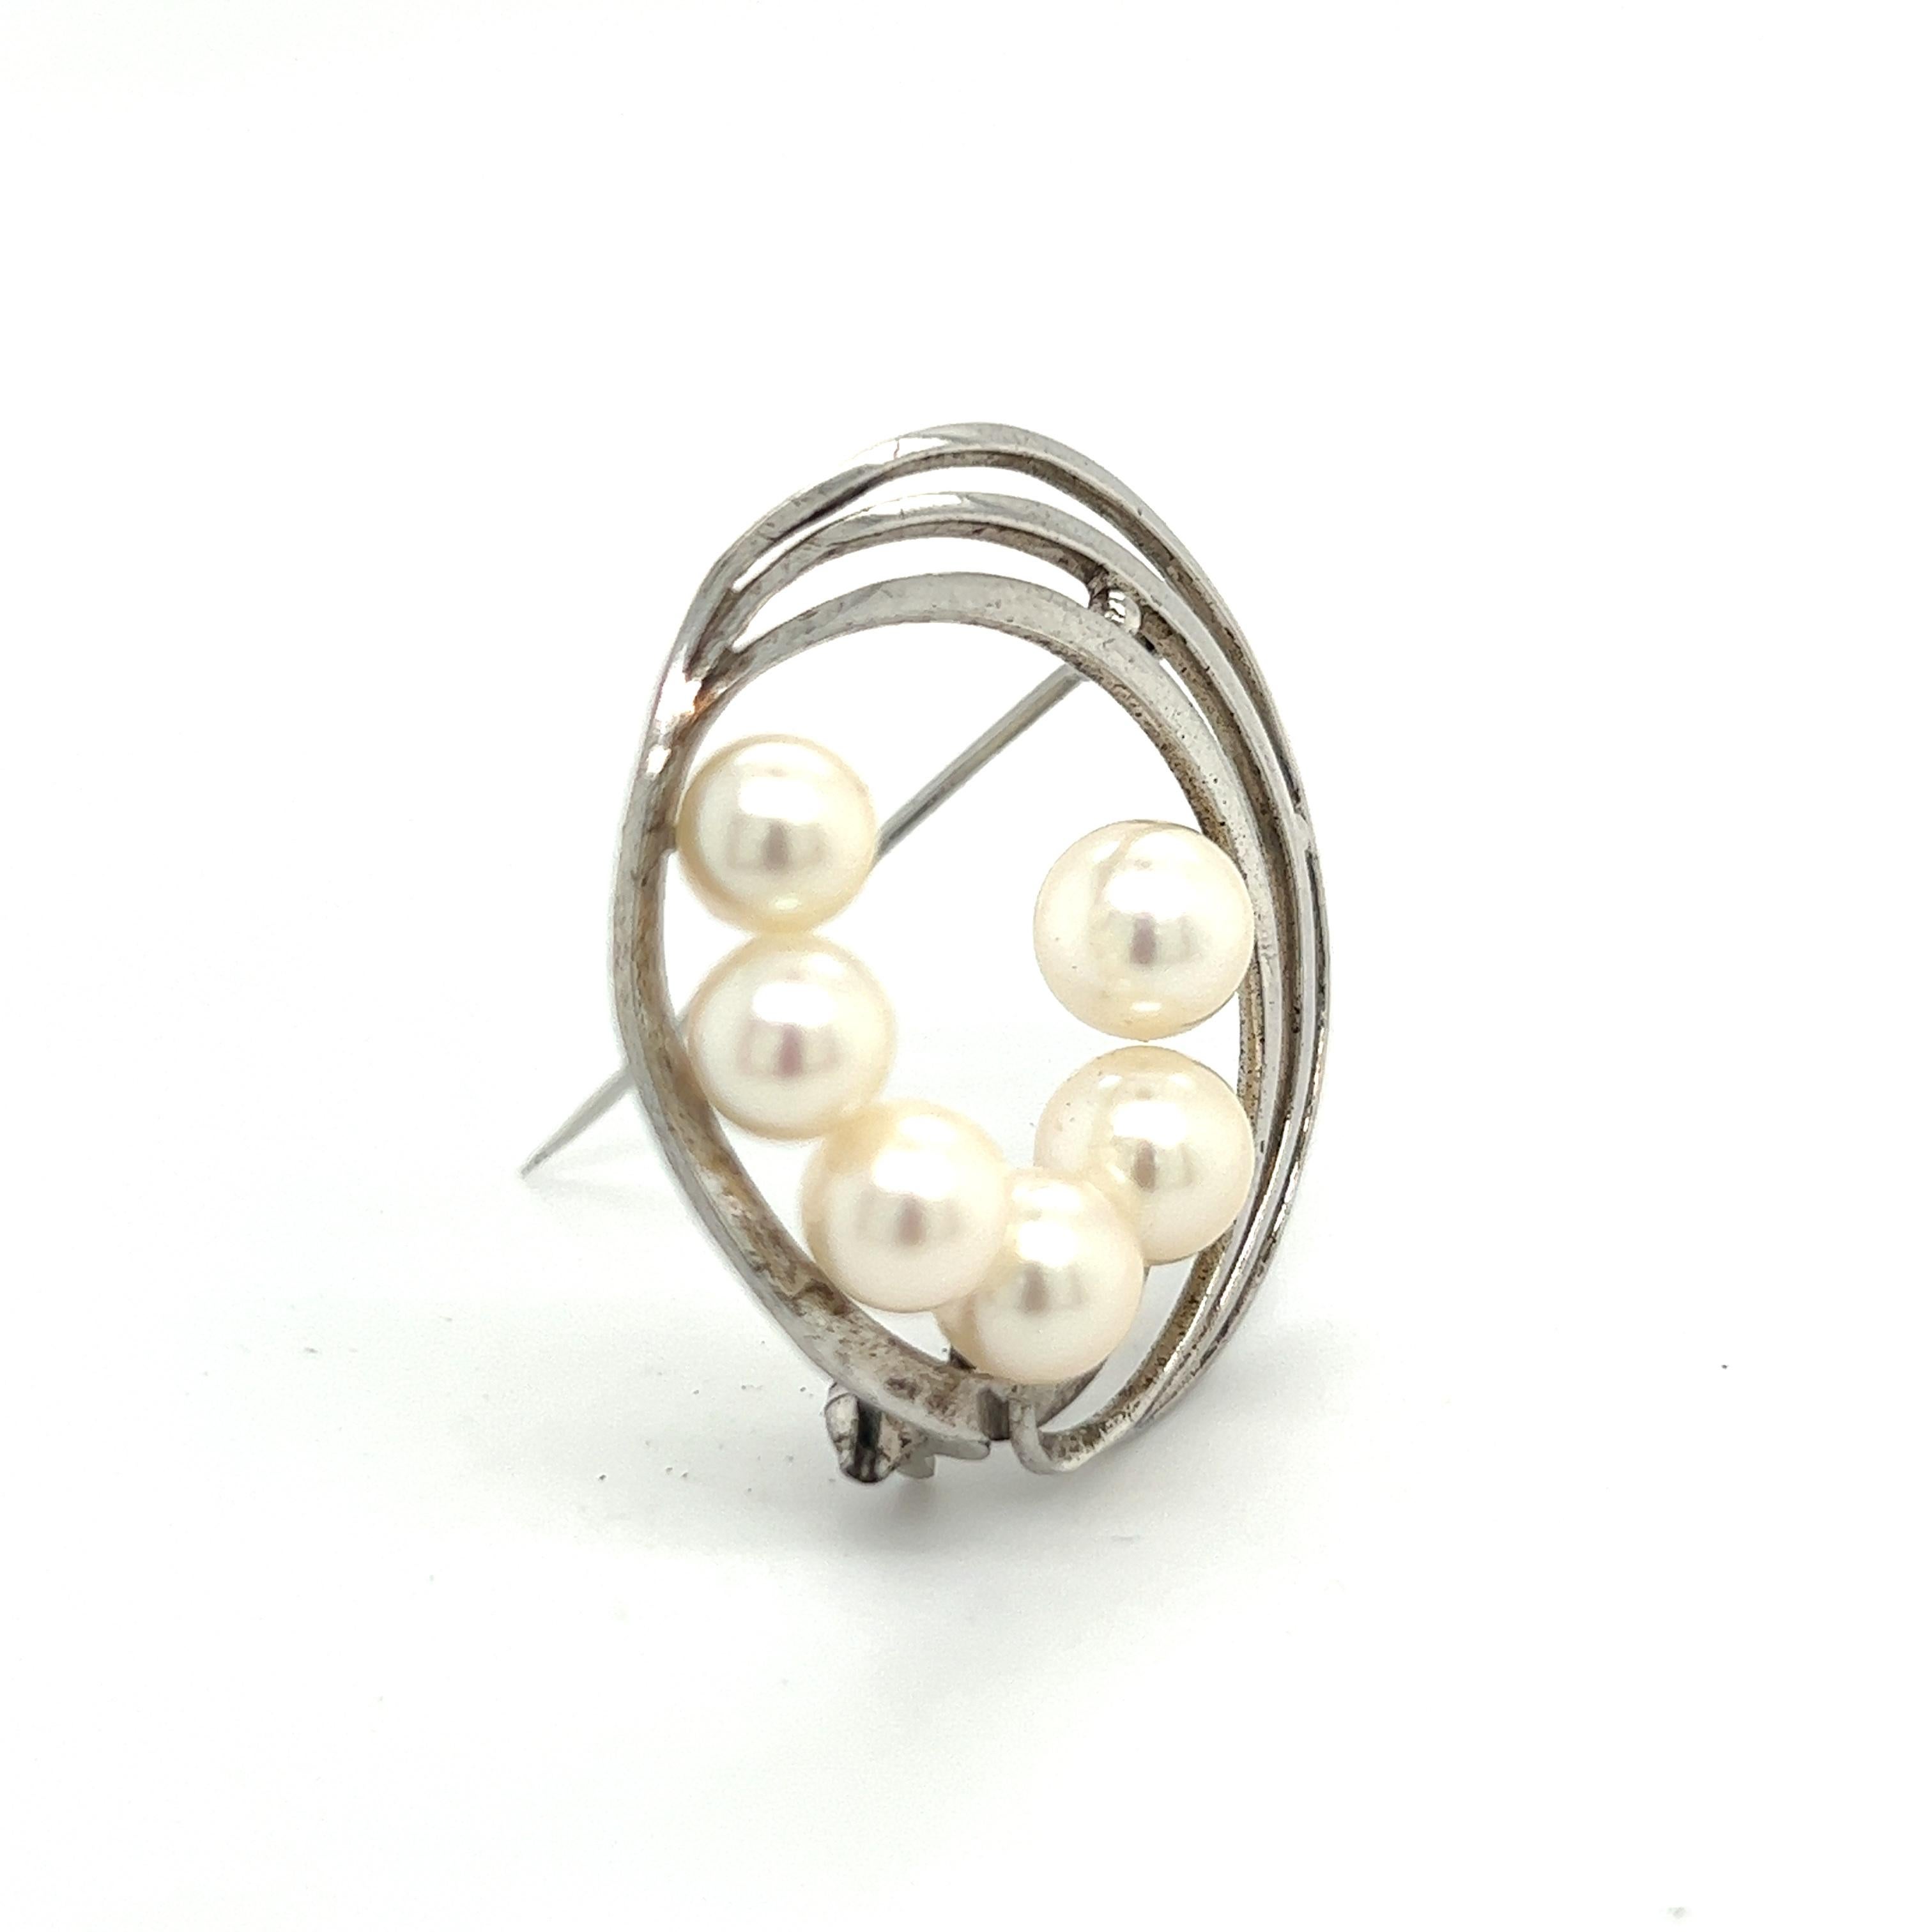 Mikimoto Estate Akoya Pearl Brooch Pin Sterling Silver 7.40 mm M285

This elegant Authentic Mikimoto Silver brooch has 6 Saltwater Akoya Cultured Pearls ranging in size from 6.10-7.40 mm with a weight of 7.2 Grams.

TRUSTED SELLER SINCE 2002

PLEASE